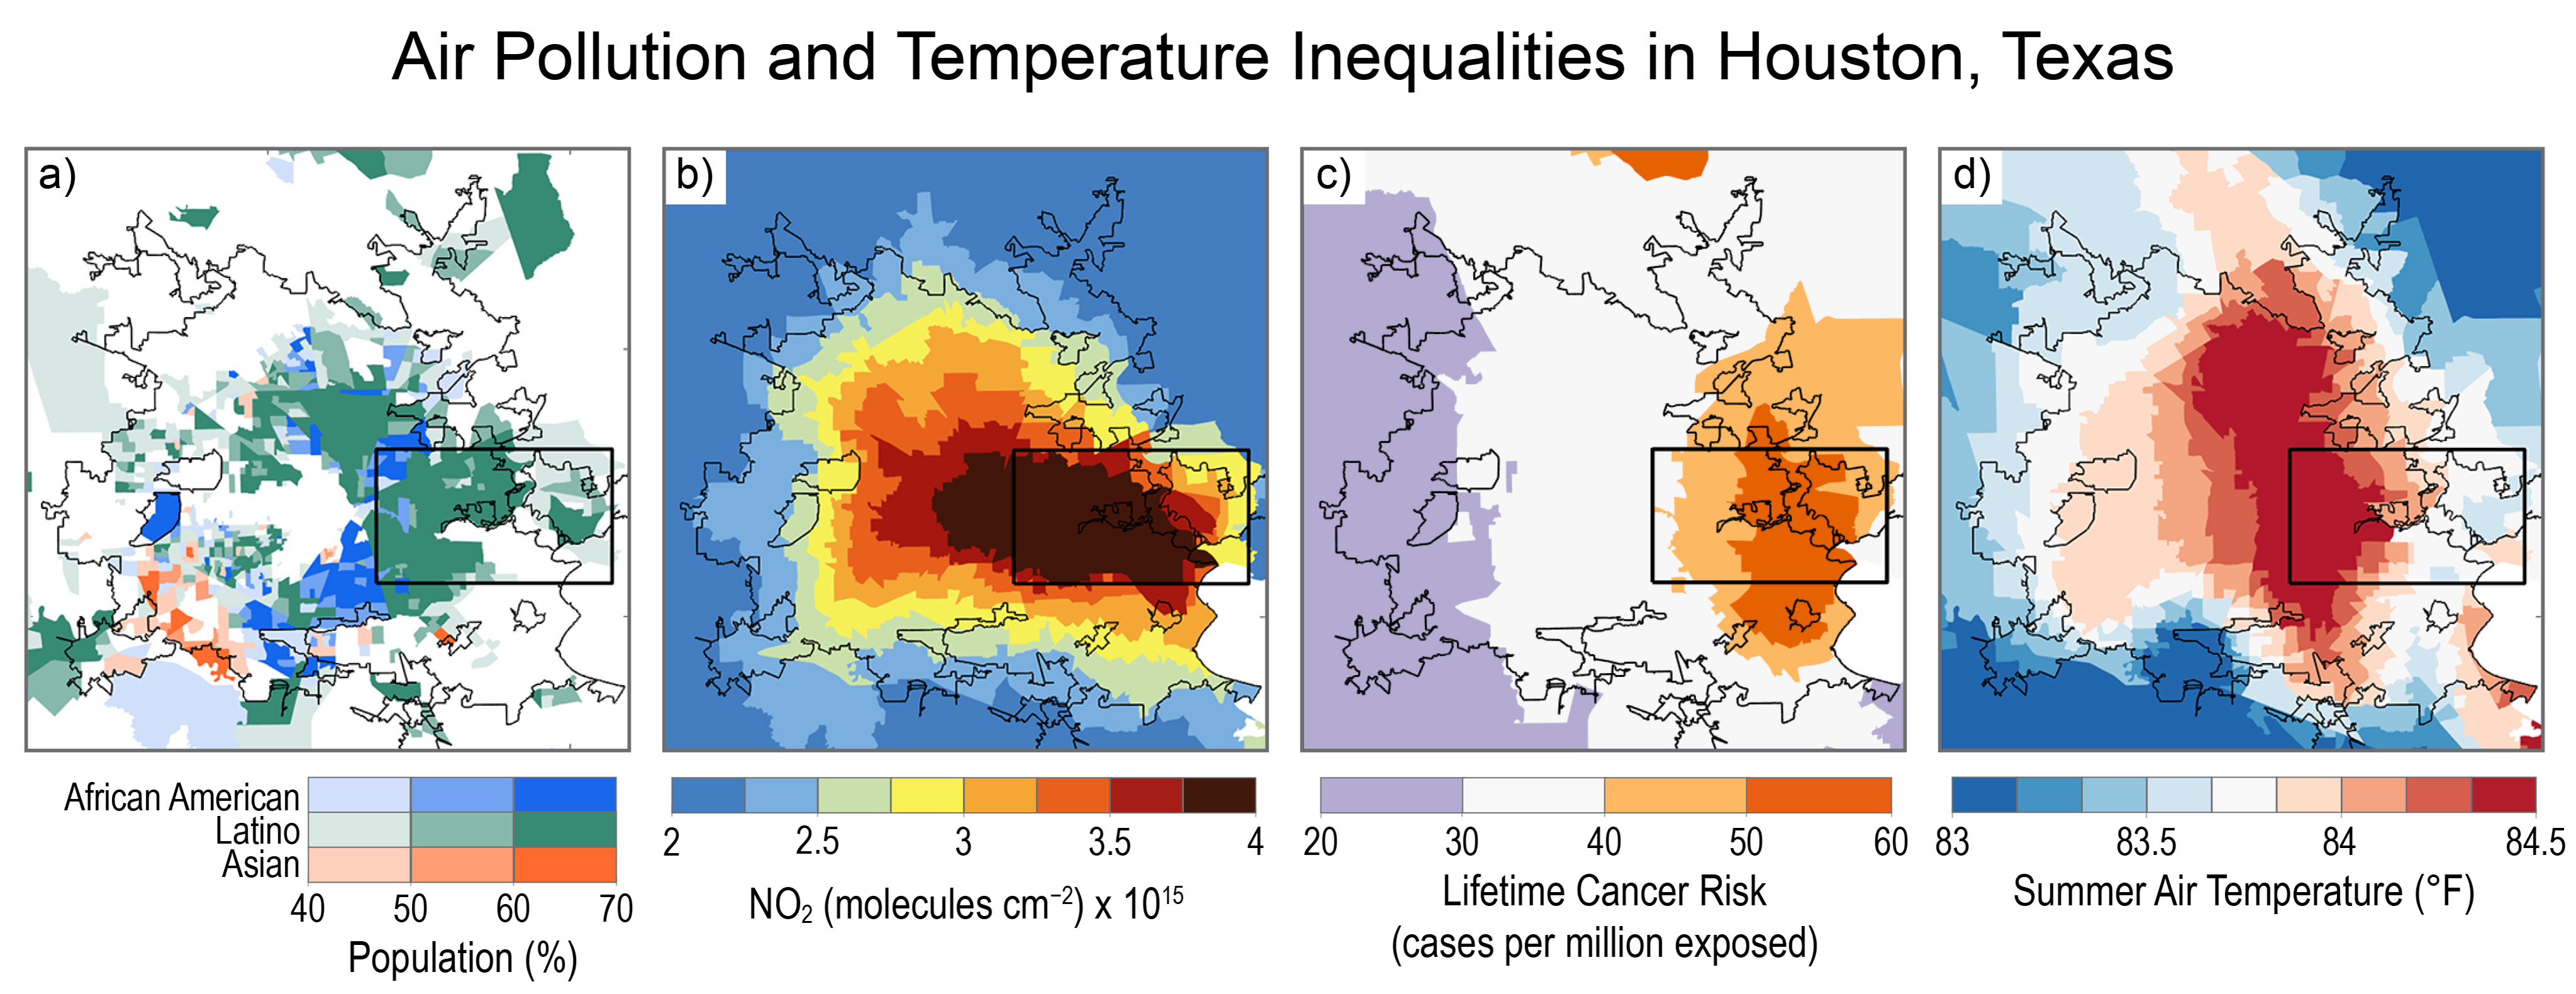 Air Pollution and Temperature Inequalities in Houston, Texas